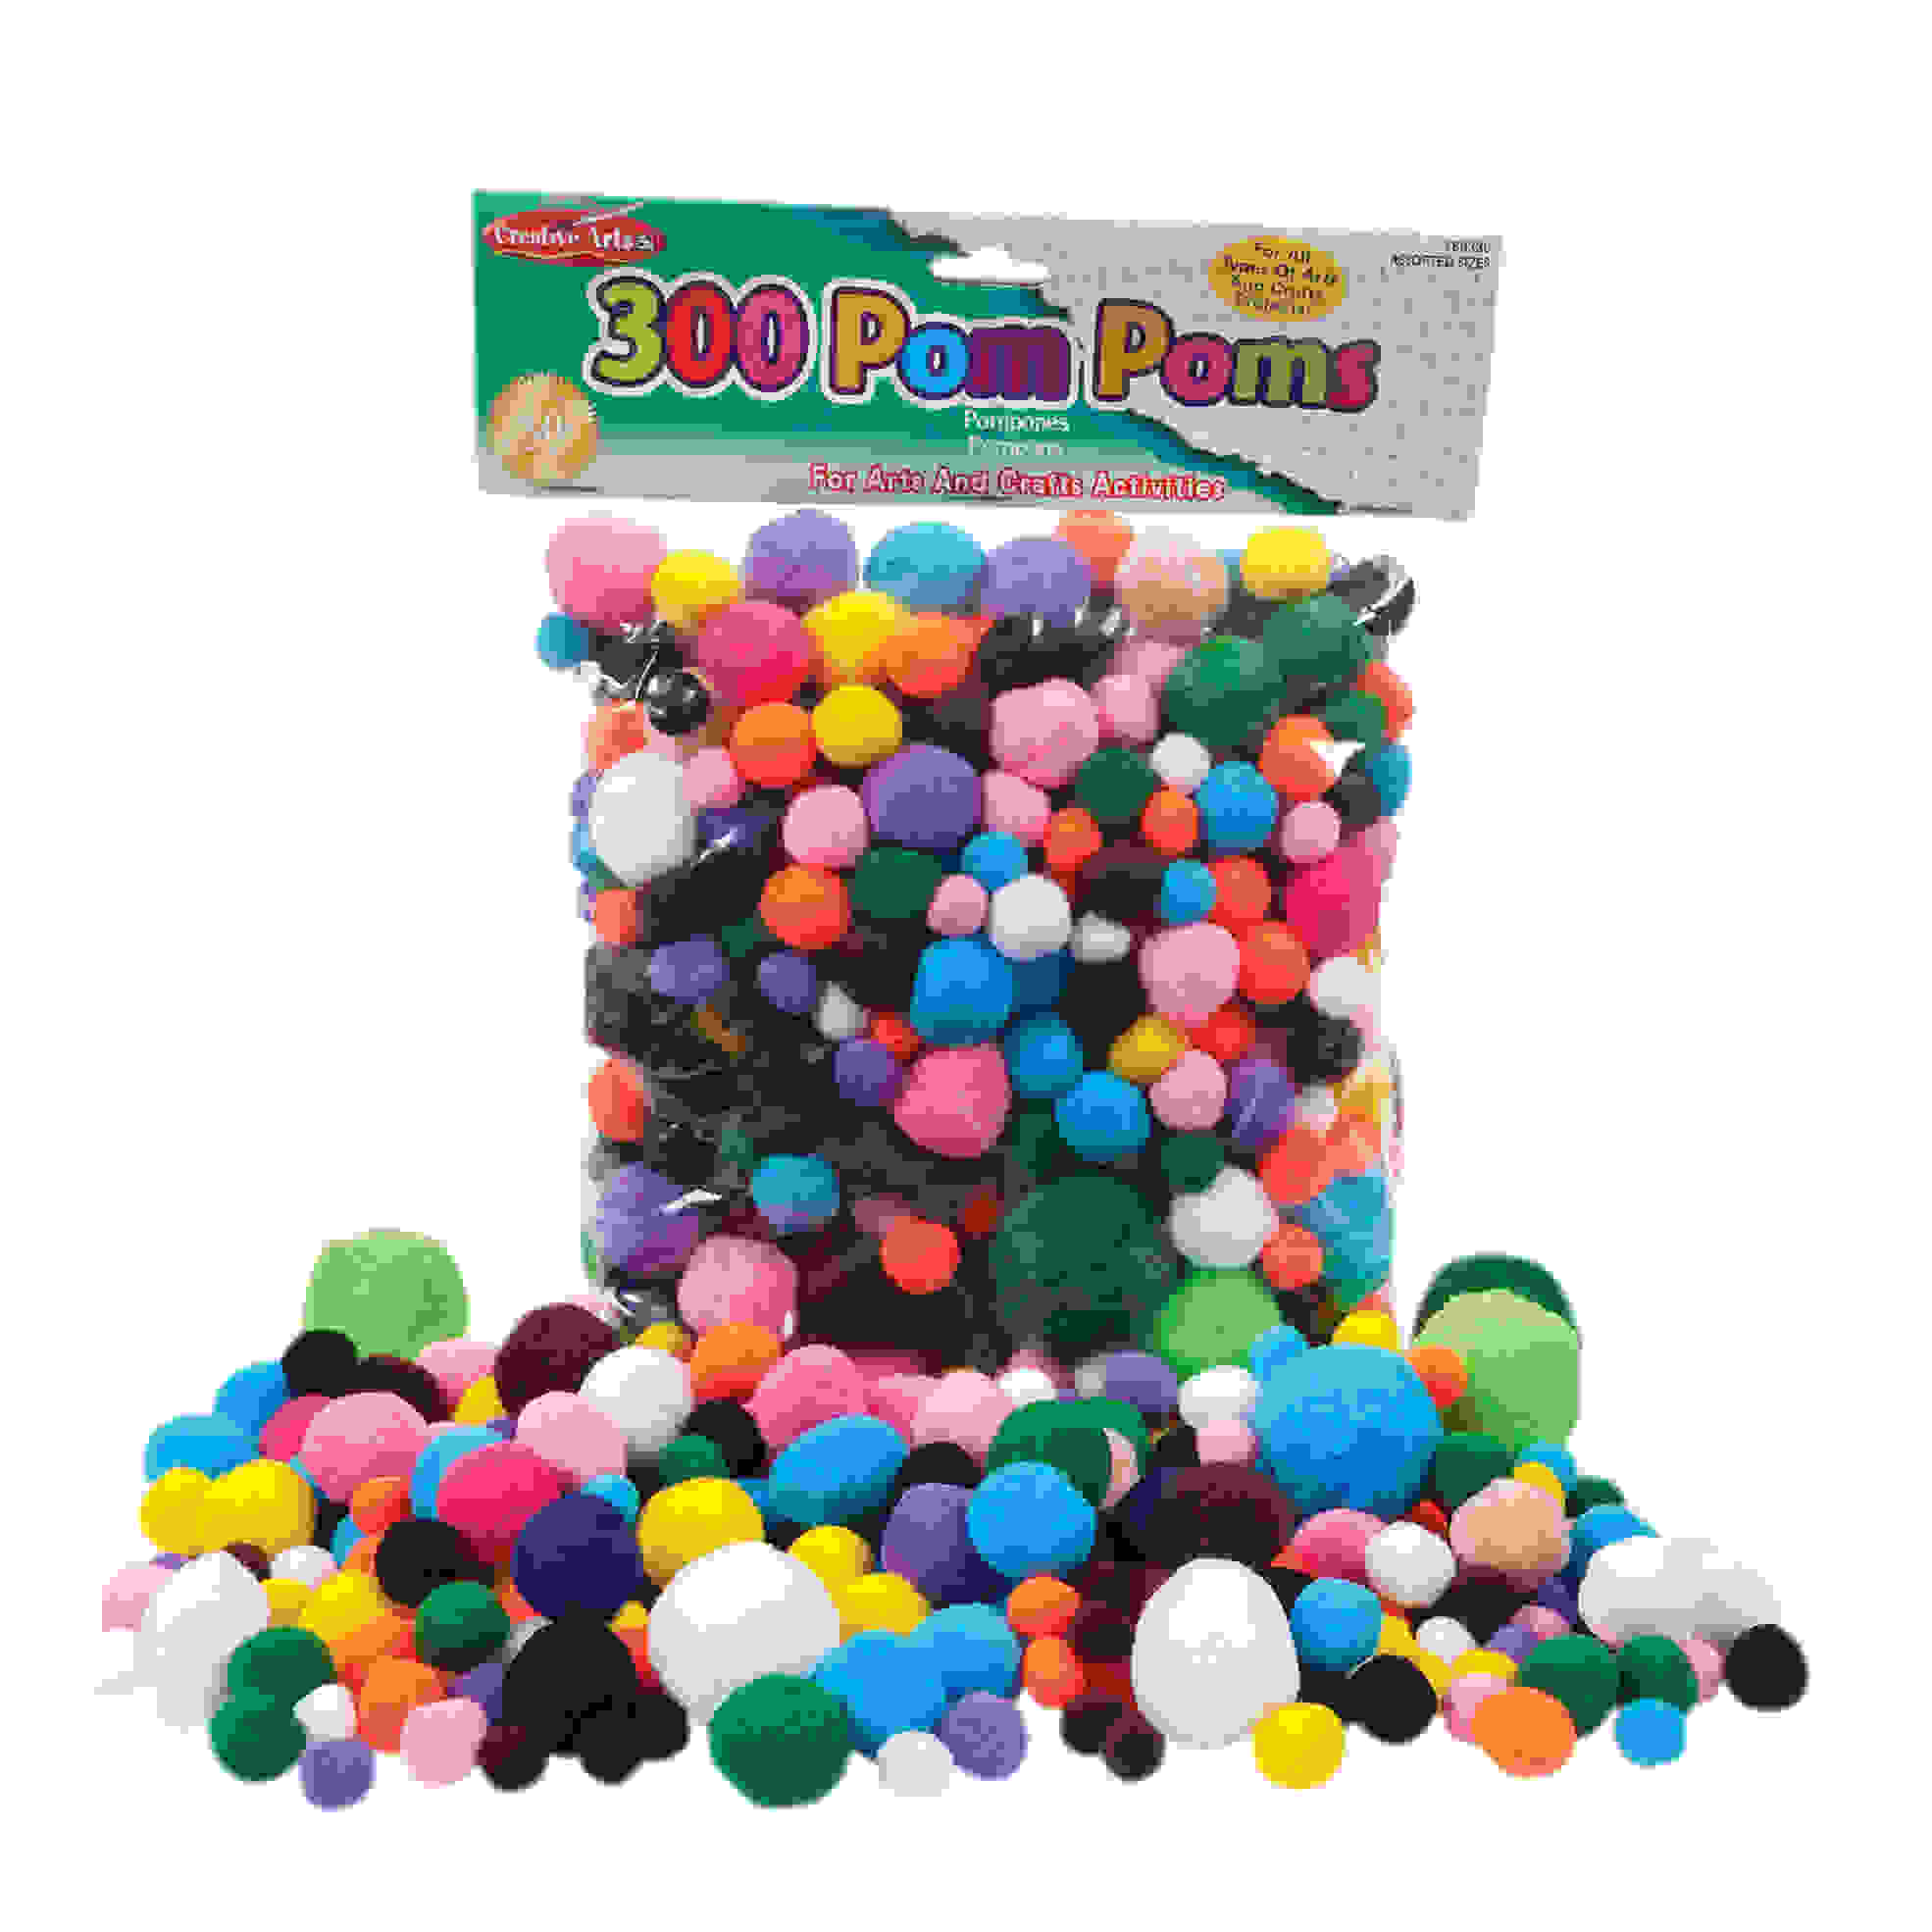 Creative Arts Pom-Poms, Assorted Sizes/Colors, Bag of 300